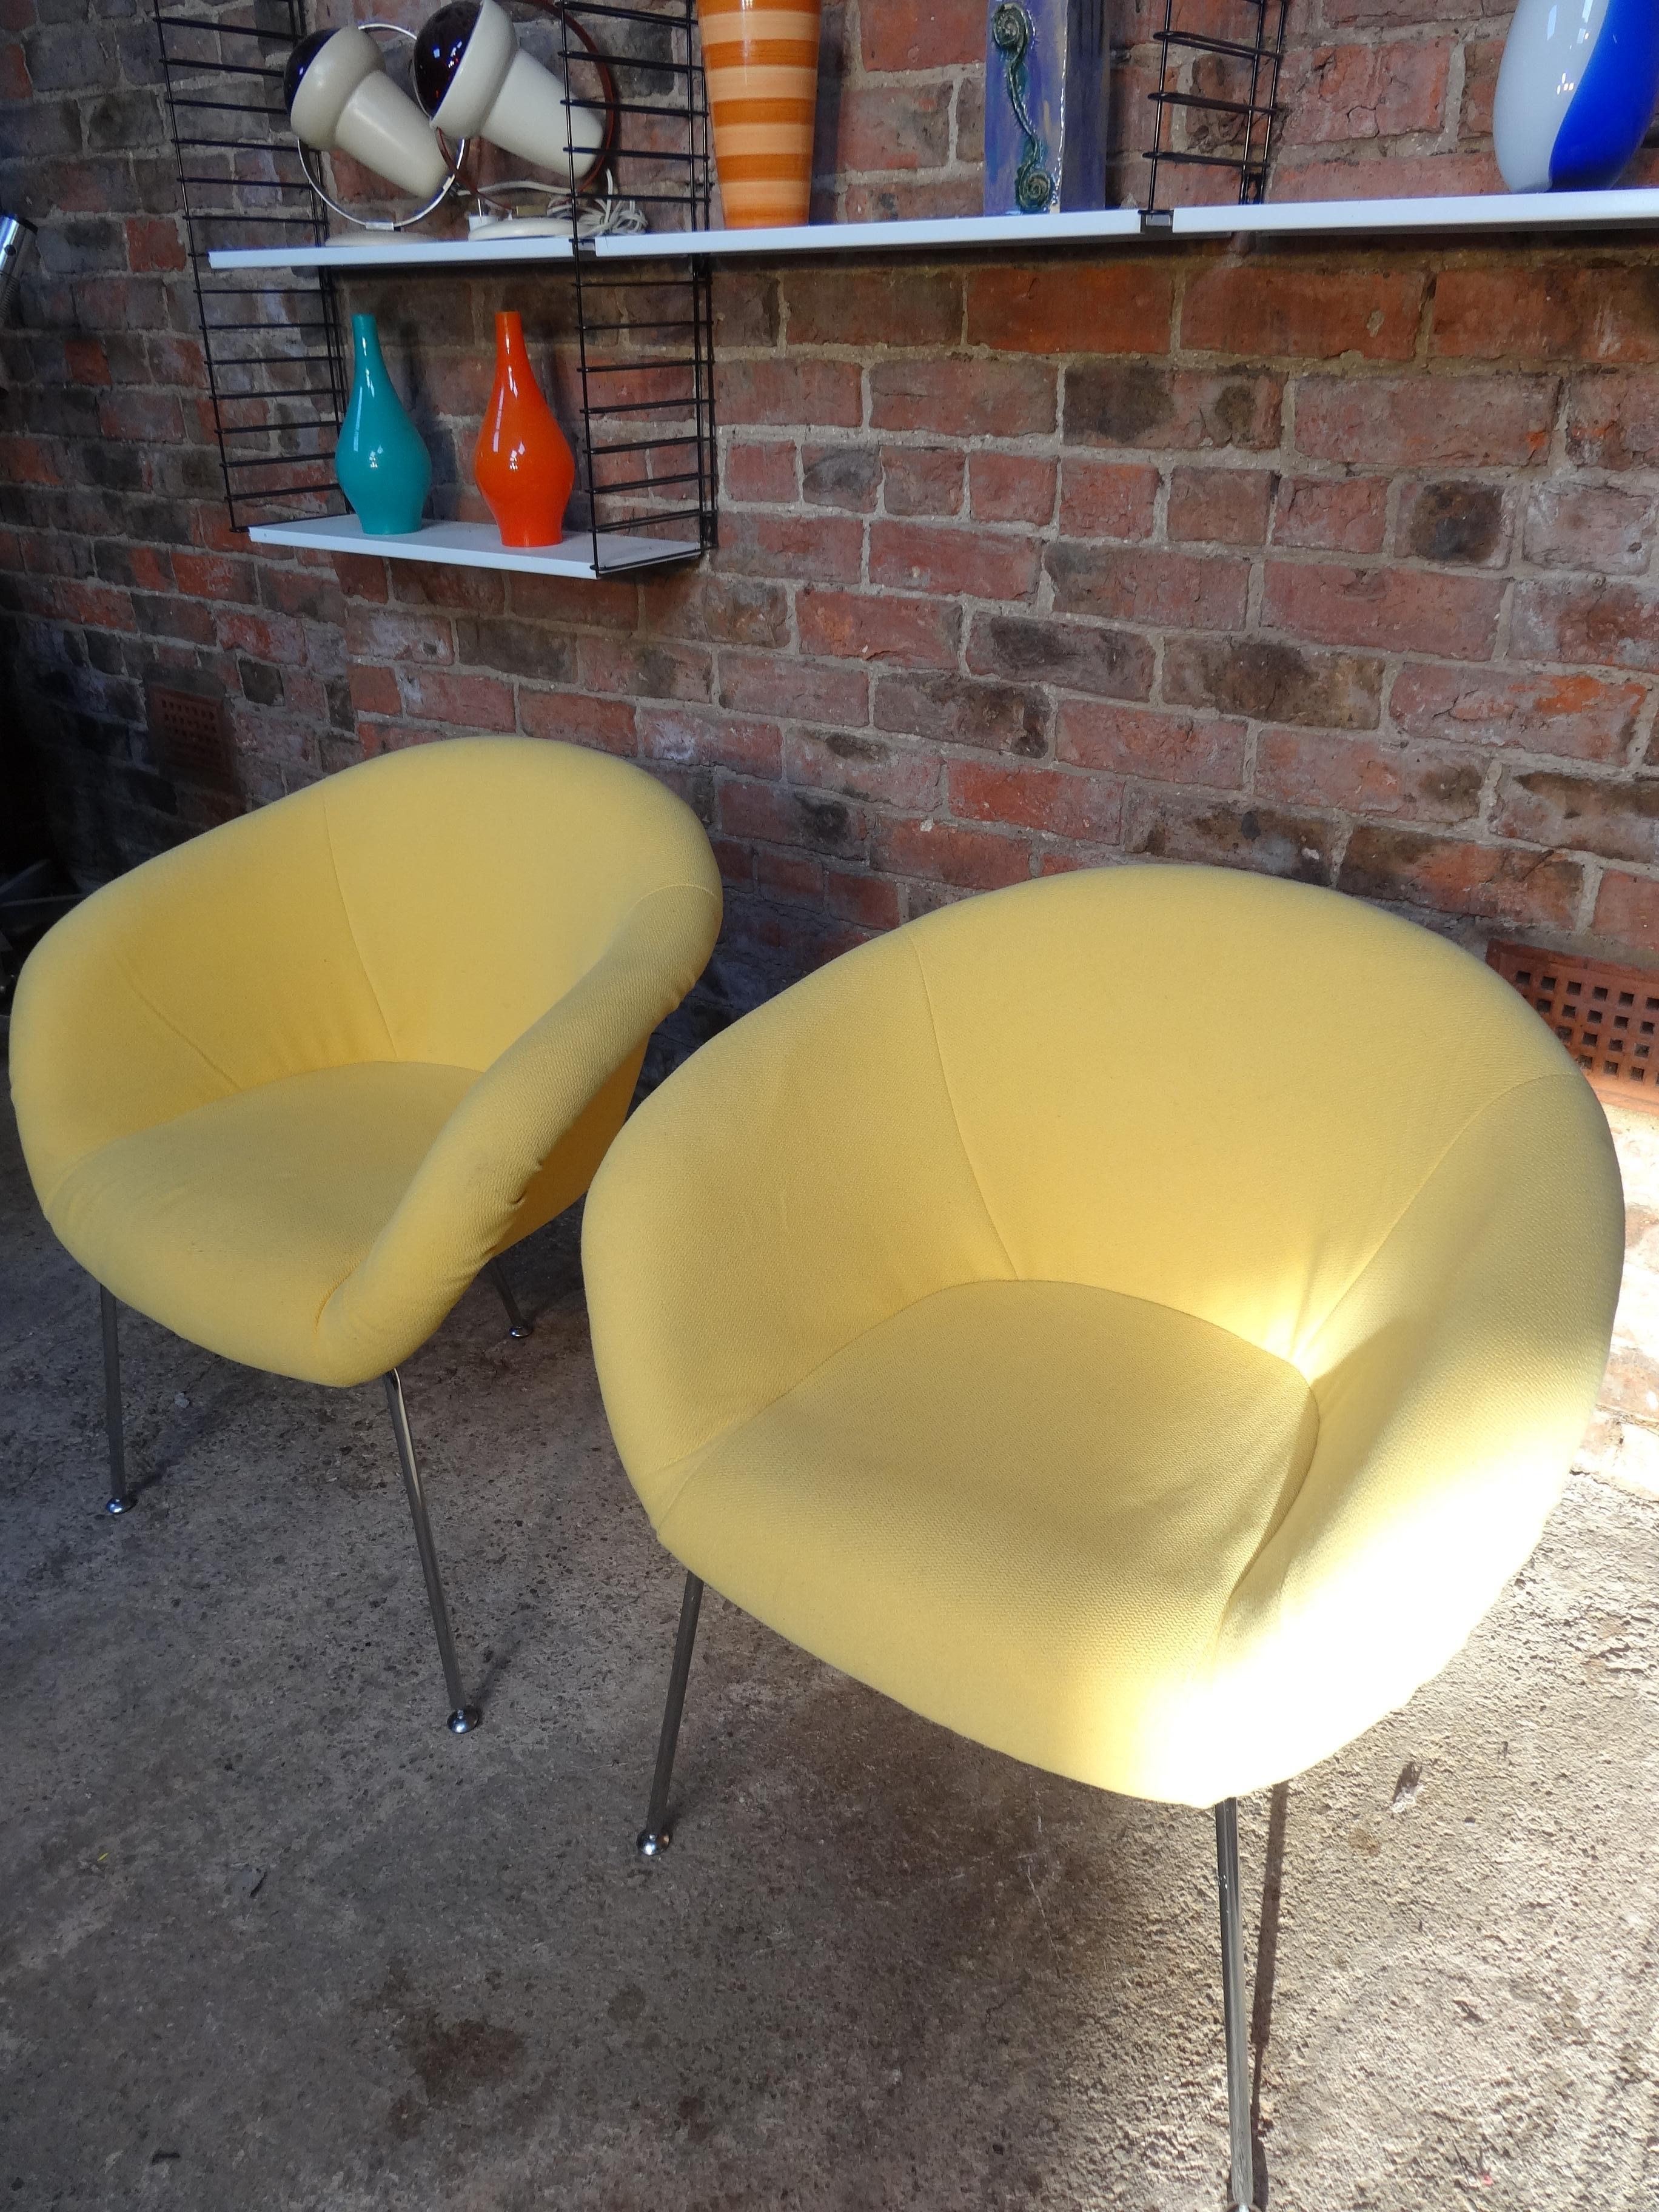 Vintage, retro 1960's Herman Miller yellow fabric vintage chairs, lovely designer chairs, have a yellow fabric which is in very good vintage condition. Herman Miller is an historic name that stands for good design and quality. Clean minimal 1960's